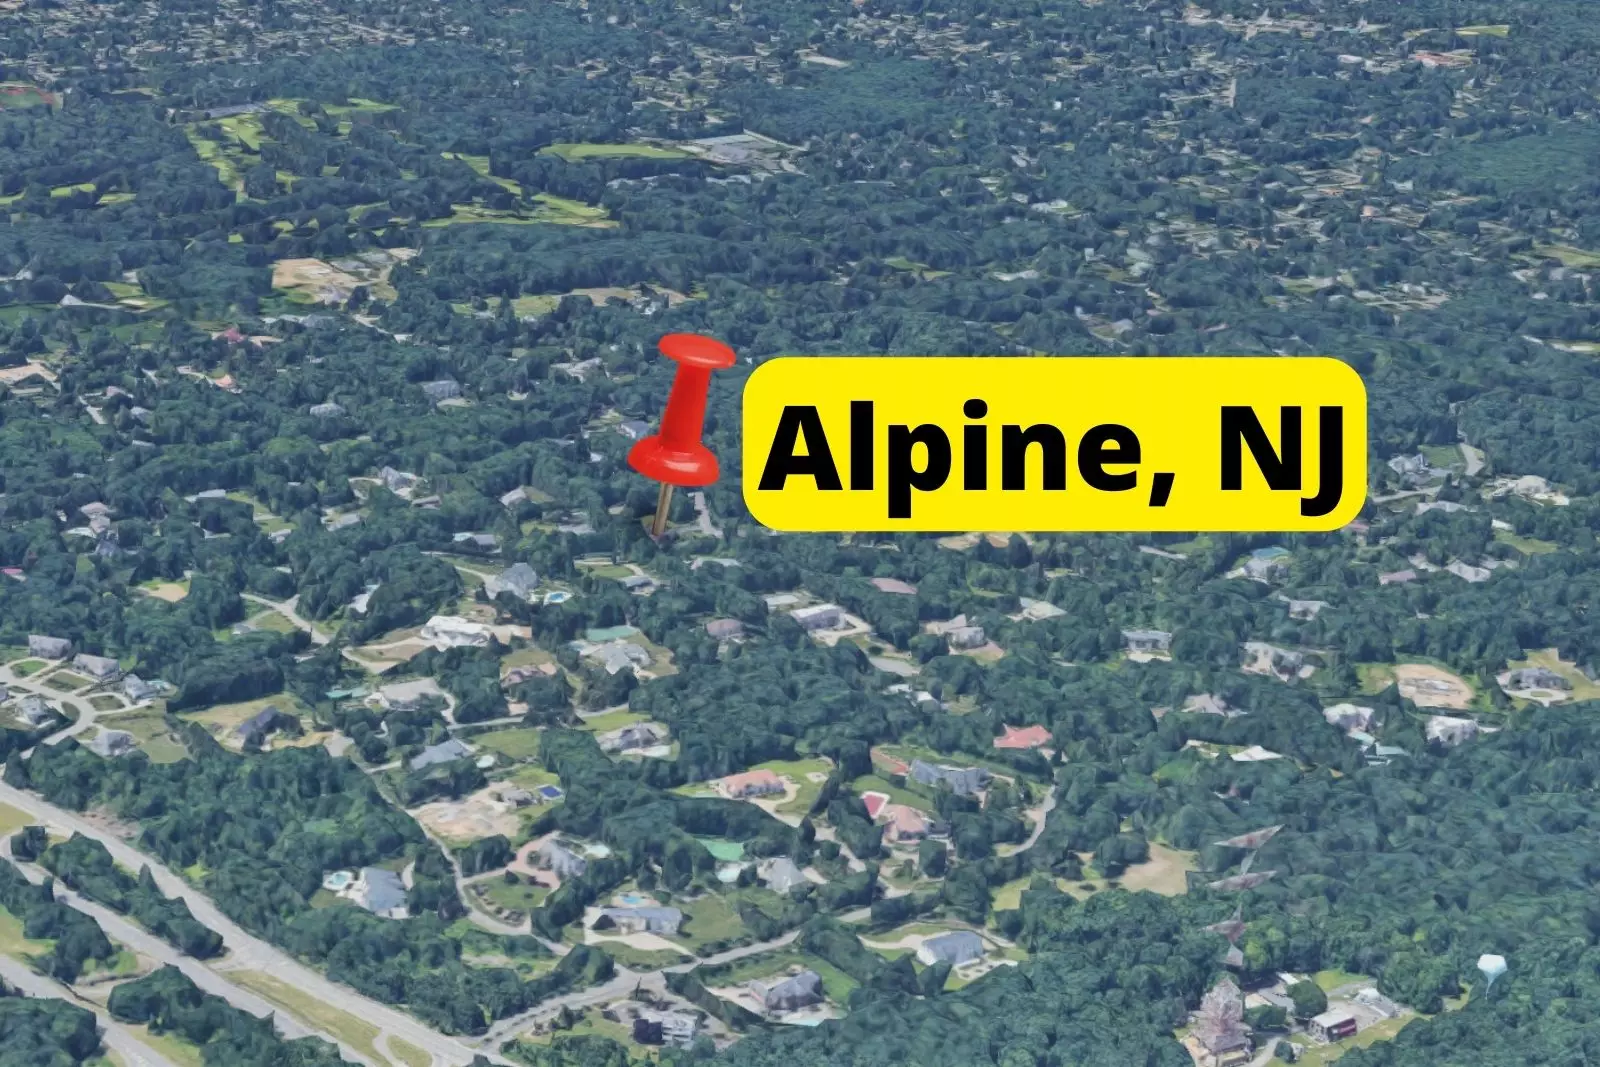 So you want to live in Alpine